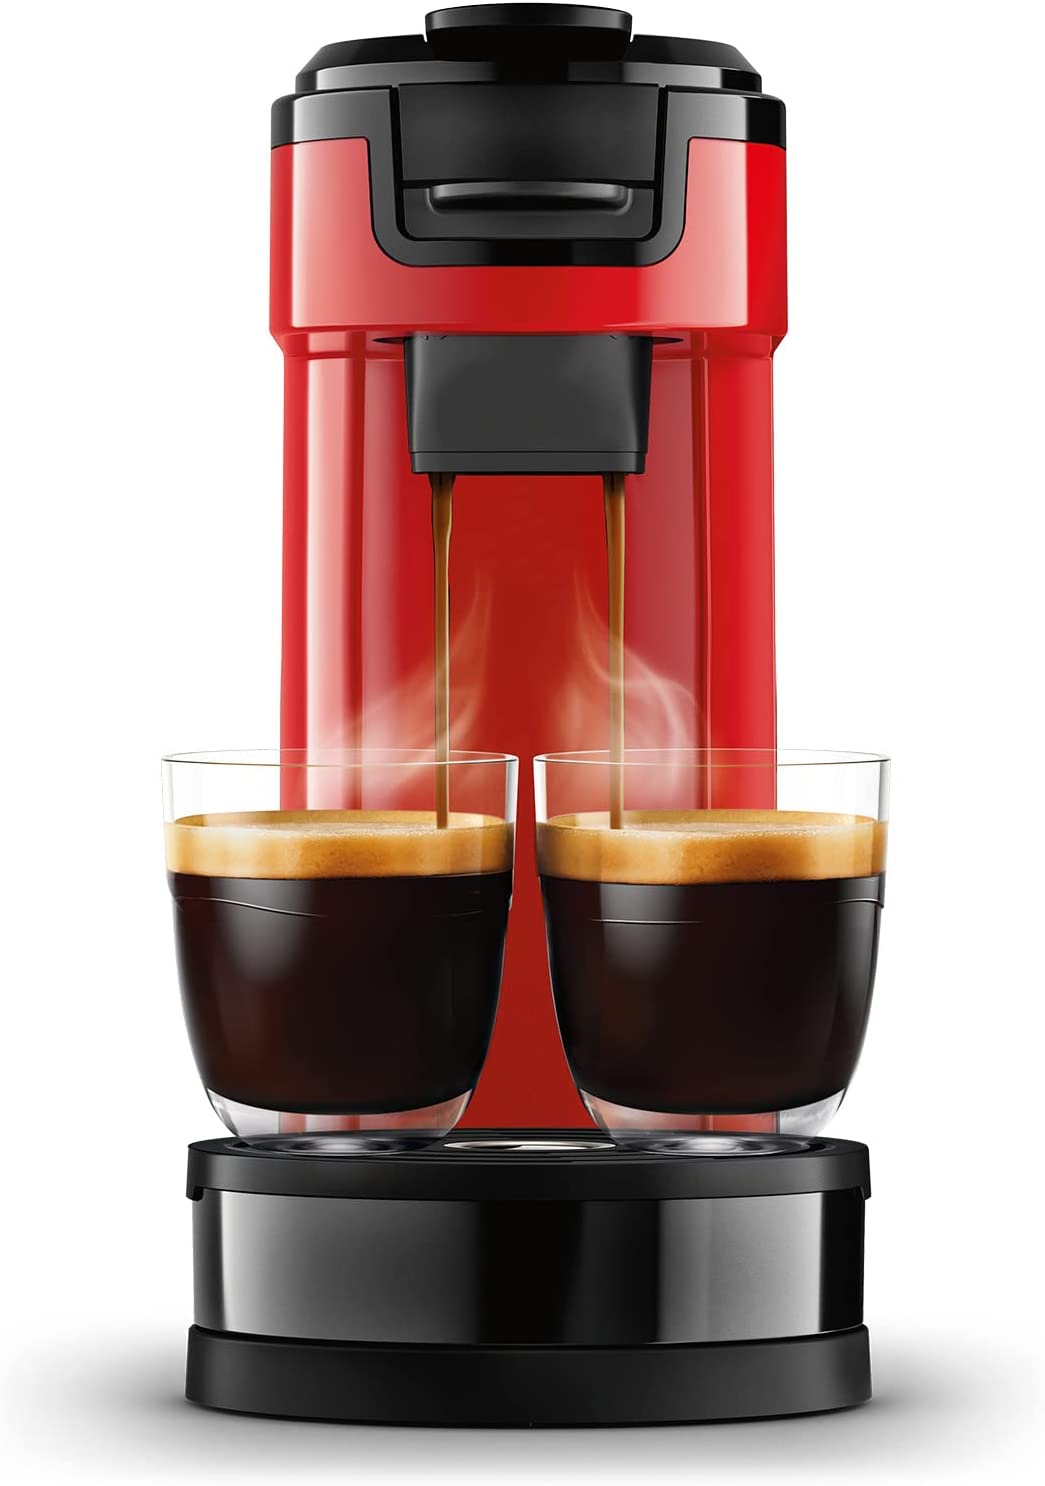 Philips Domestic Appliances Senseo Philips Switch Coffee Maker and Filter - 2-in-1 Technology, 1 Litre Water Tank, 7 Cups in a Single Wood, Colour Red (HD6592/85)